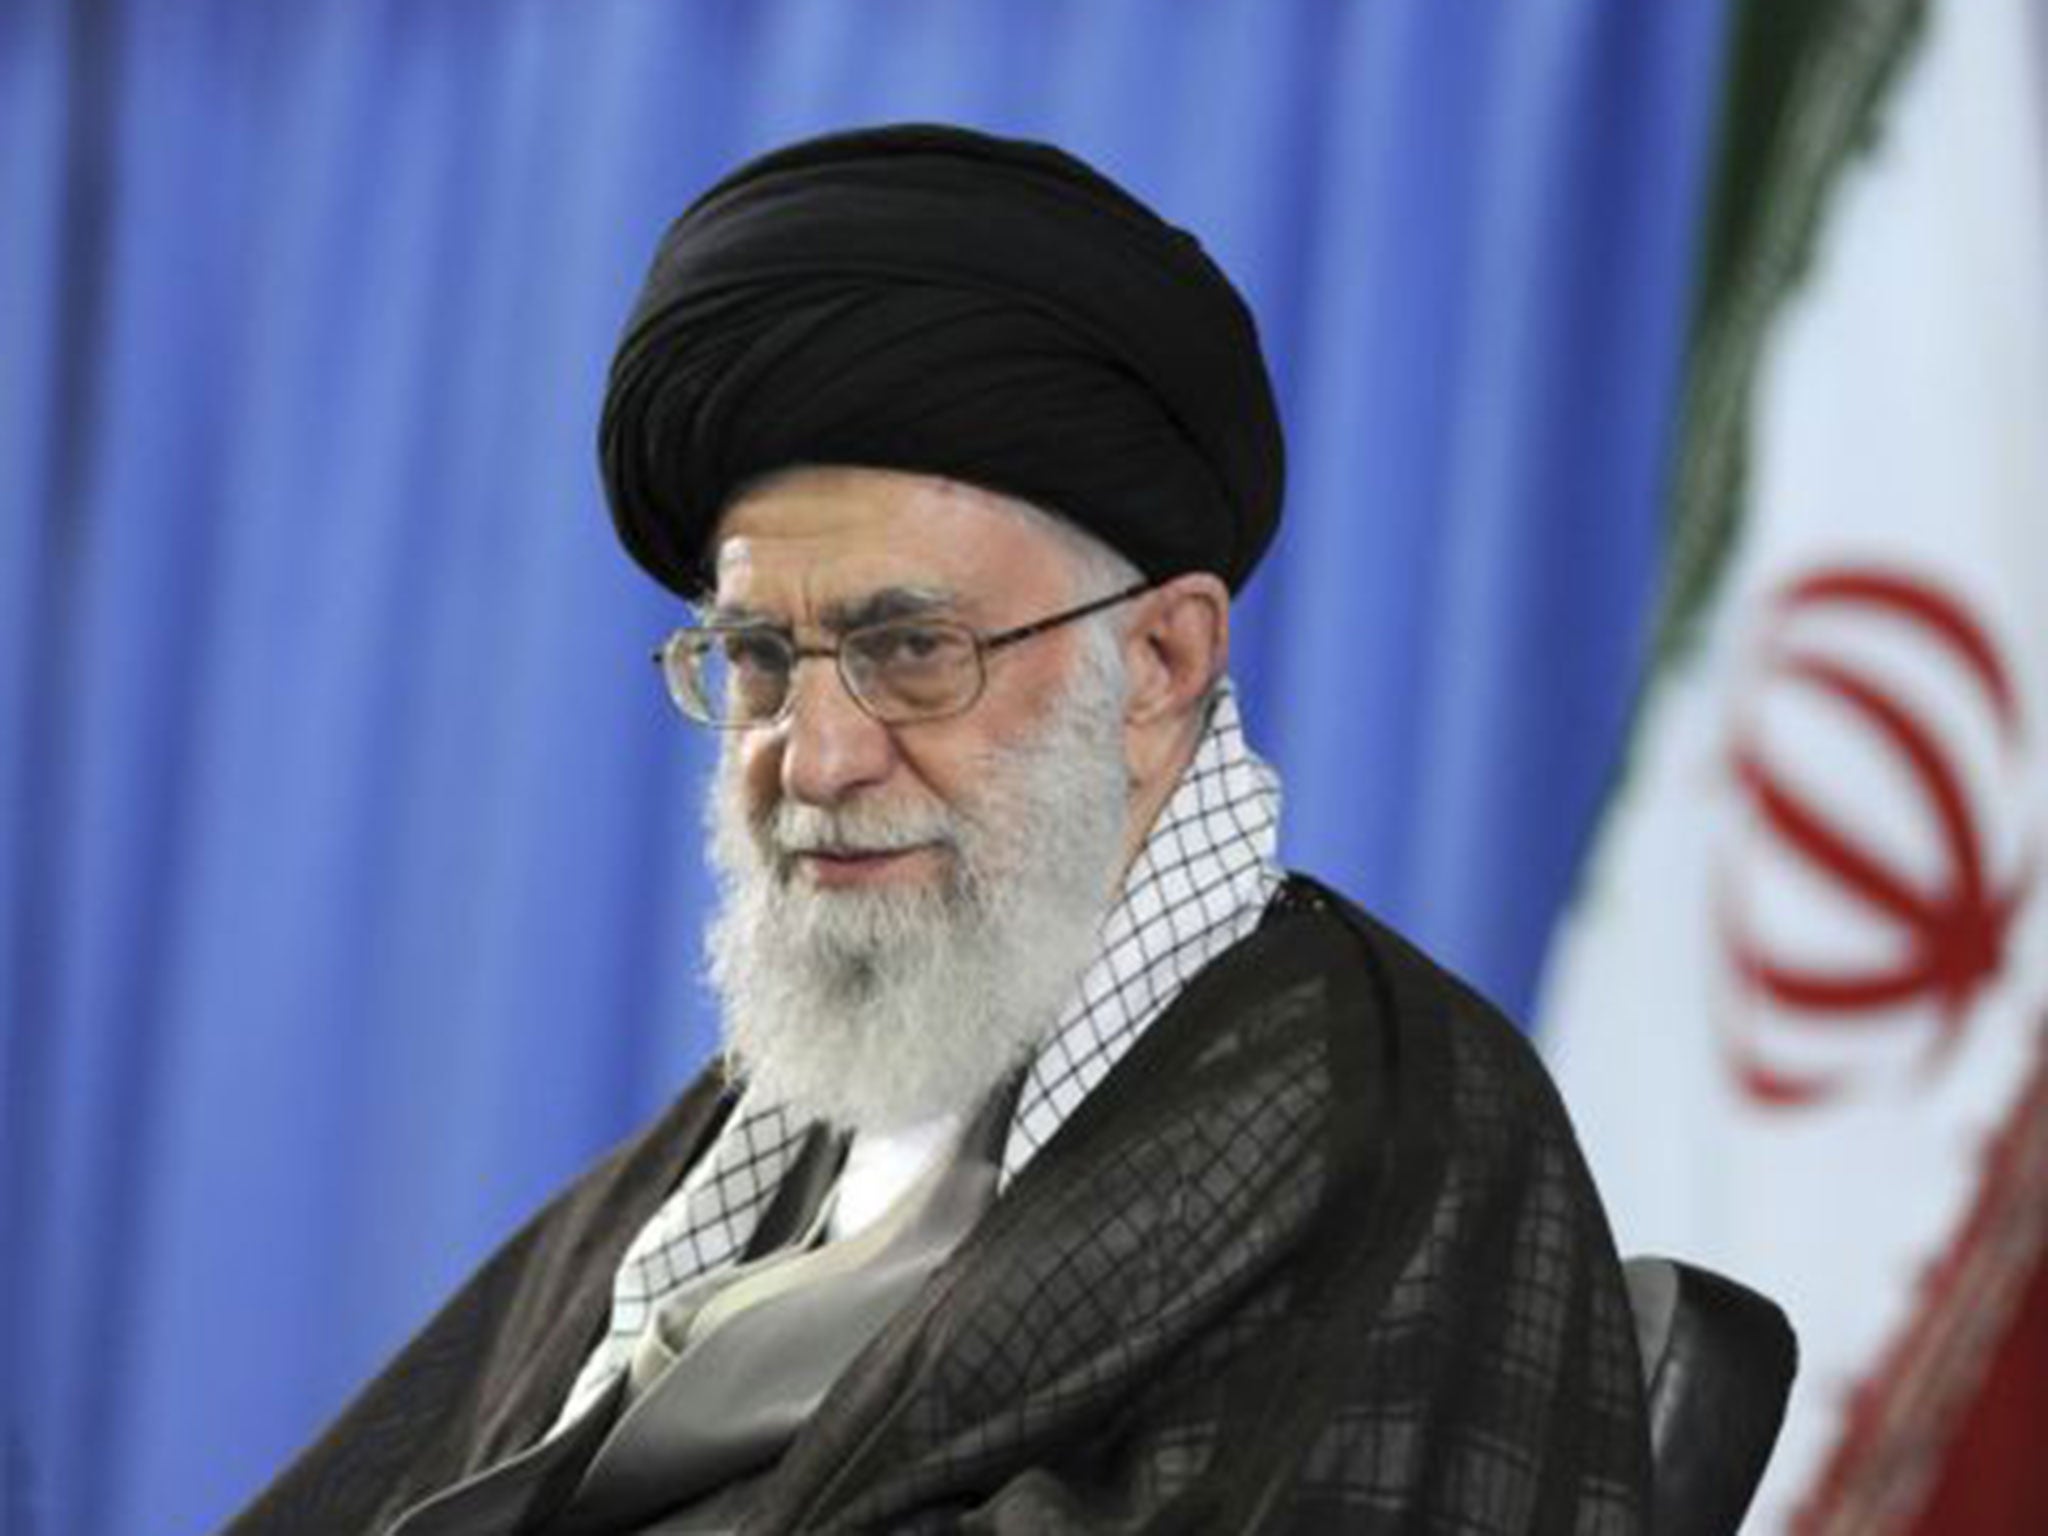 Ayatollah Khamenei said there should be no relations with the US or Israel